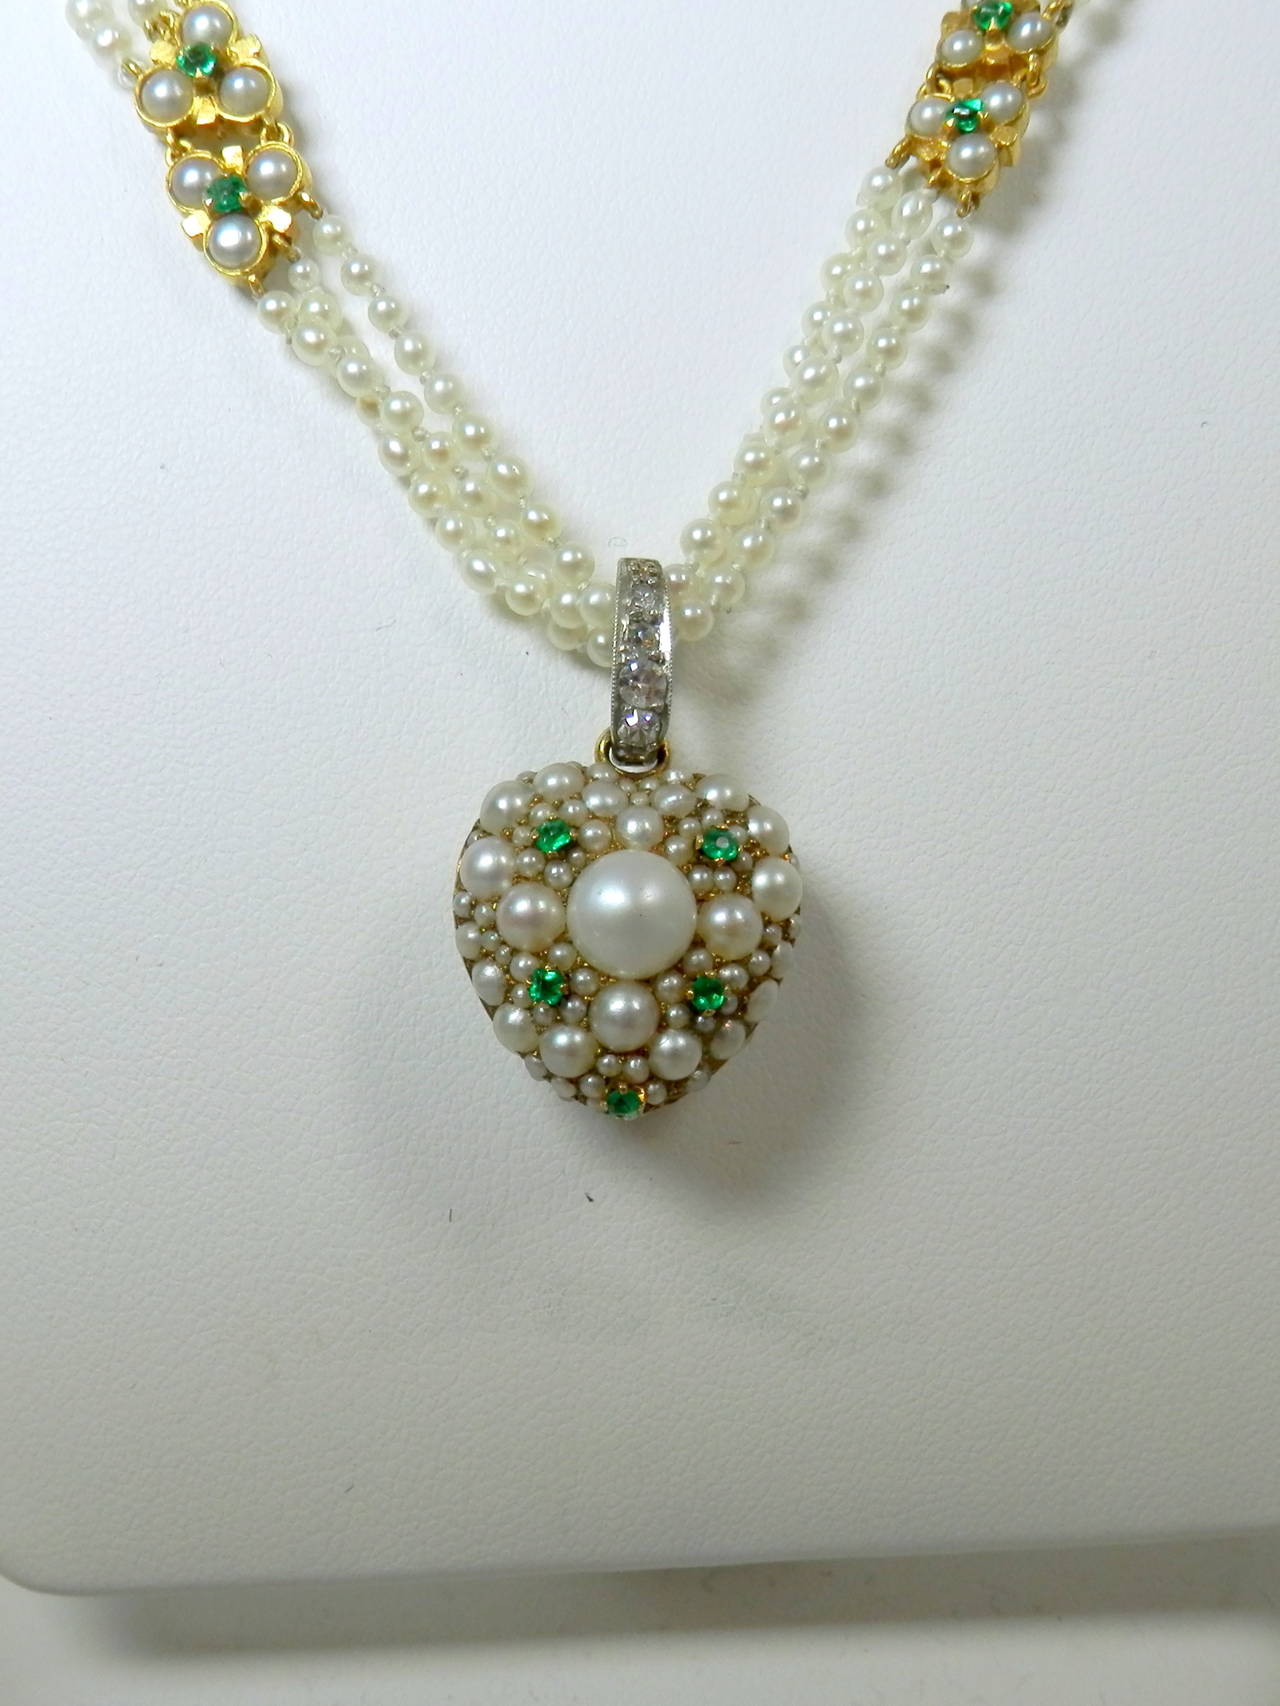 18K Natural pearls, emeralds and small diamonds decorating the gold and platinum bale.  The heart is signed on the inside Tiffany & Co.  The small emerald and pearl motifs along the chain are decorated on both side.  26 1/2 inches long. Victorian,